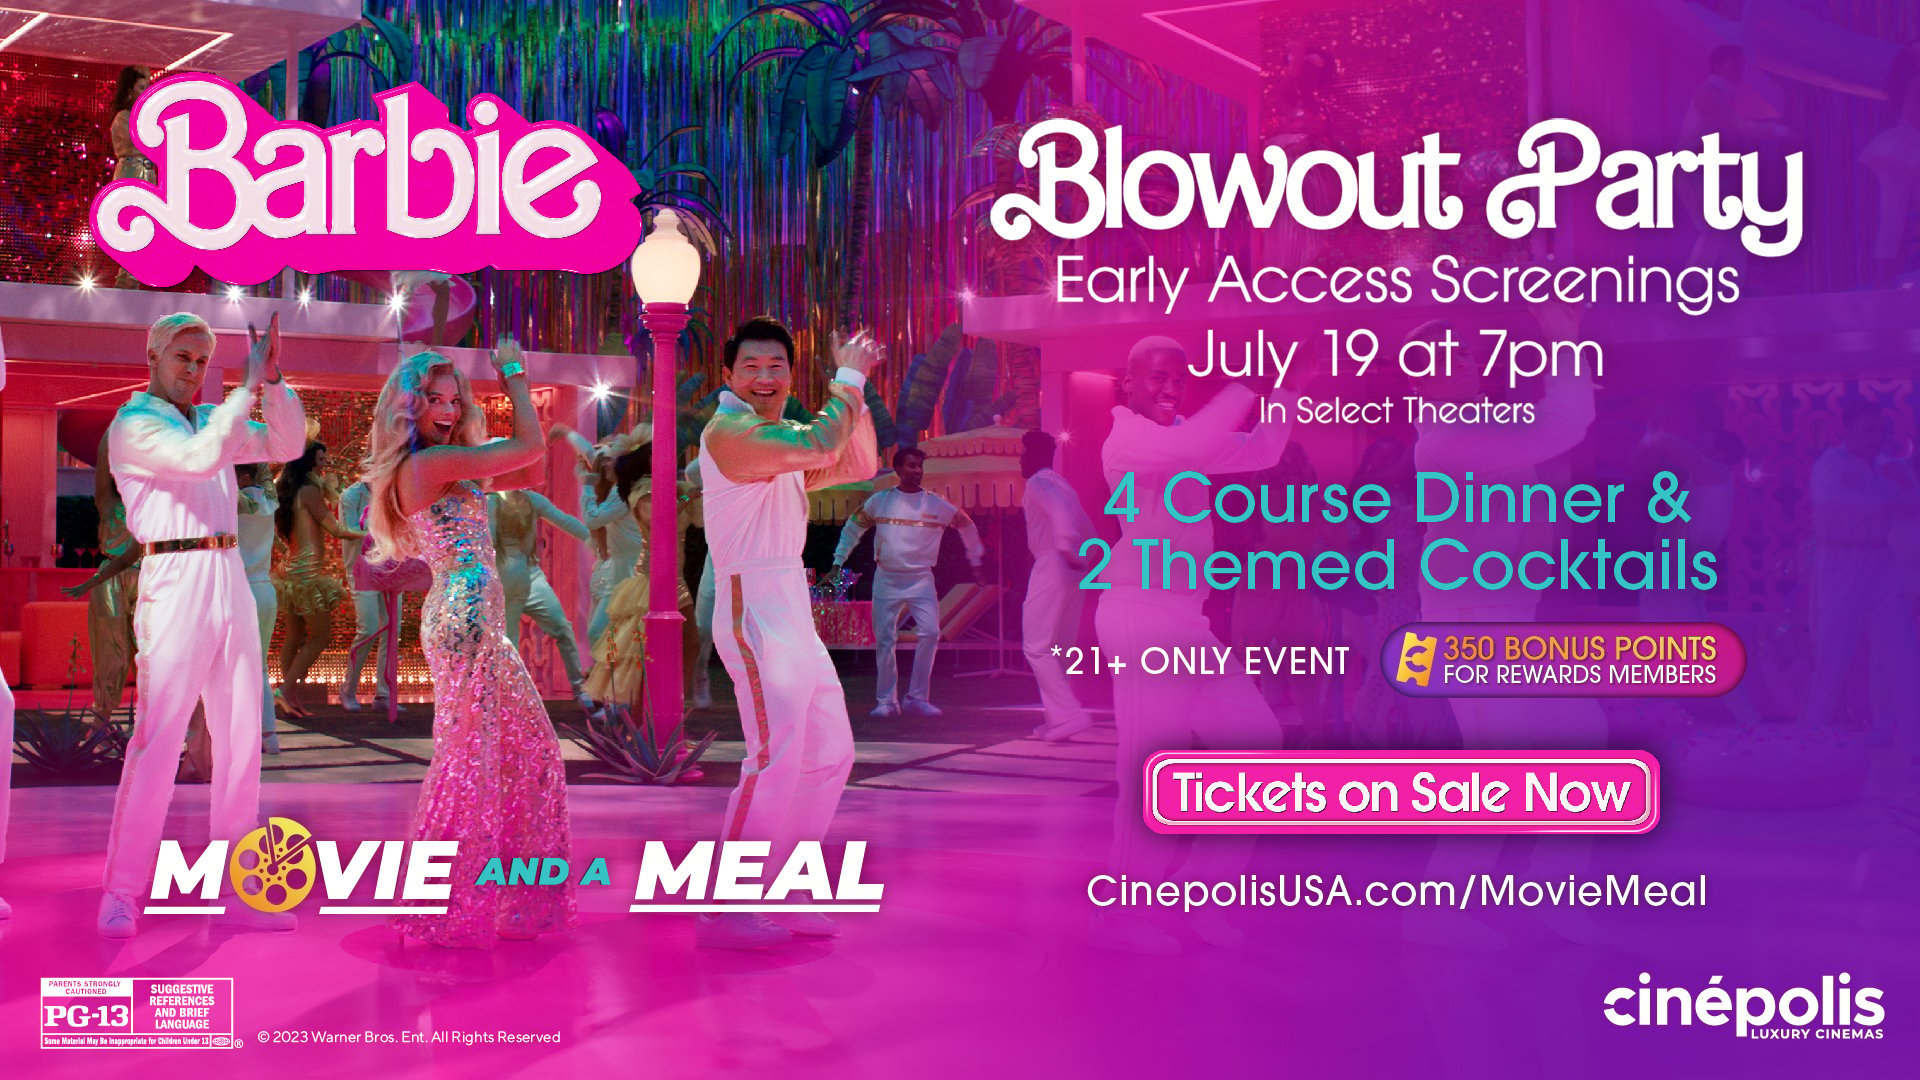 Movie and a Meal takes over Barbie Blowout Party